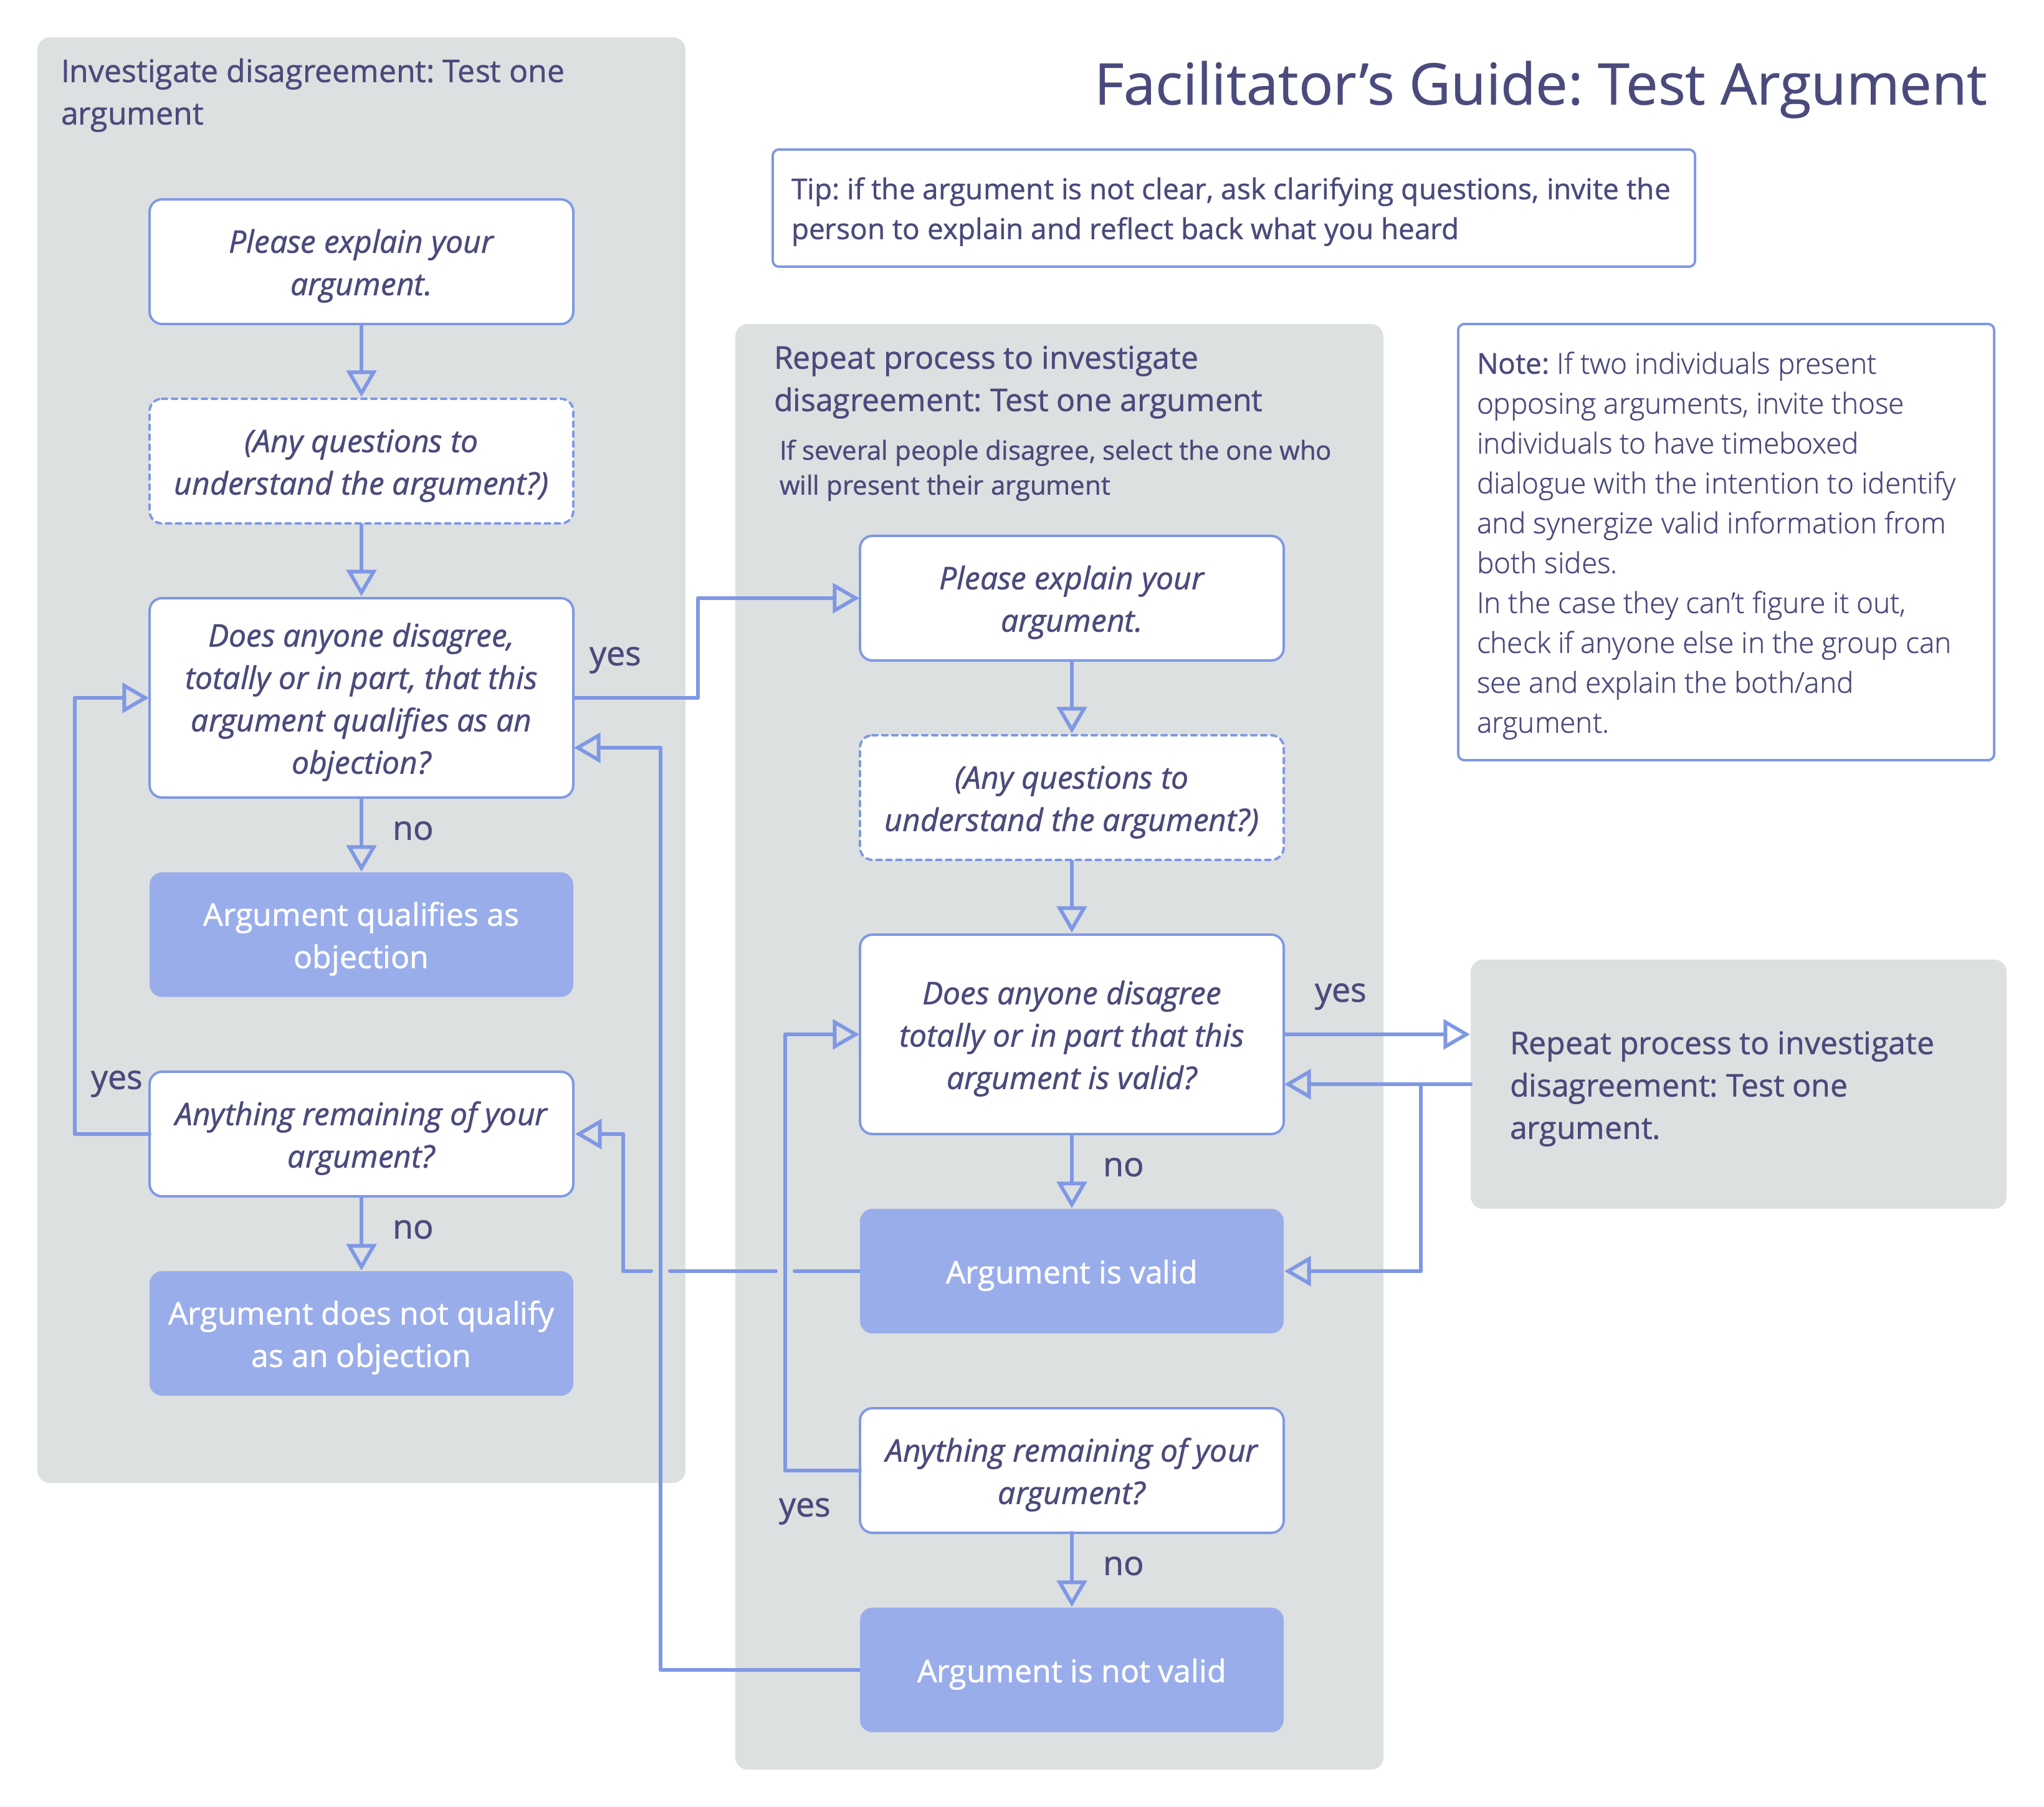 Facilitator’s Guide: Test Arguments Qualify As Objections